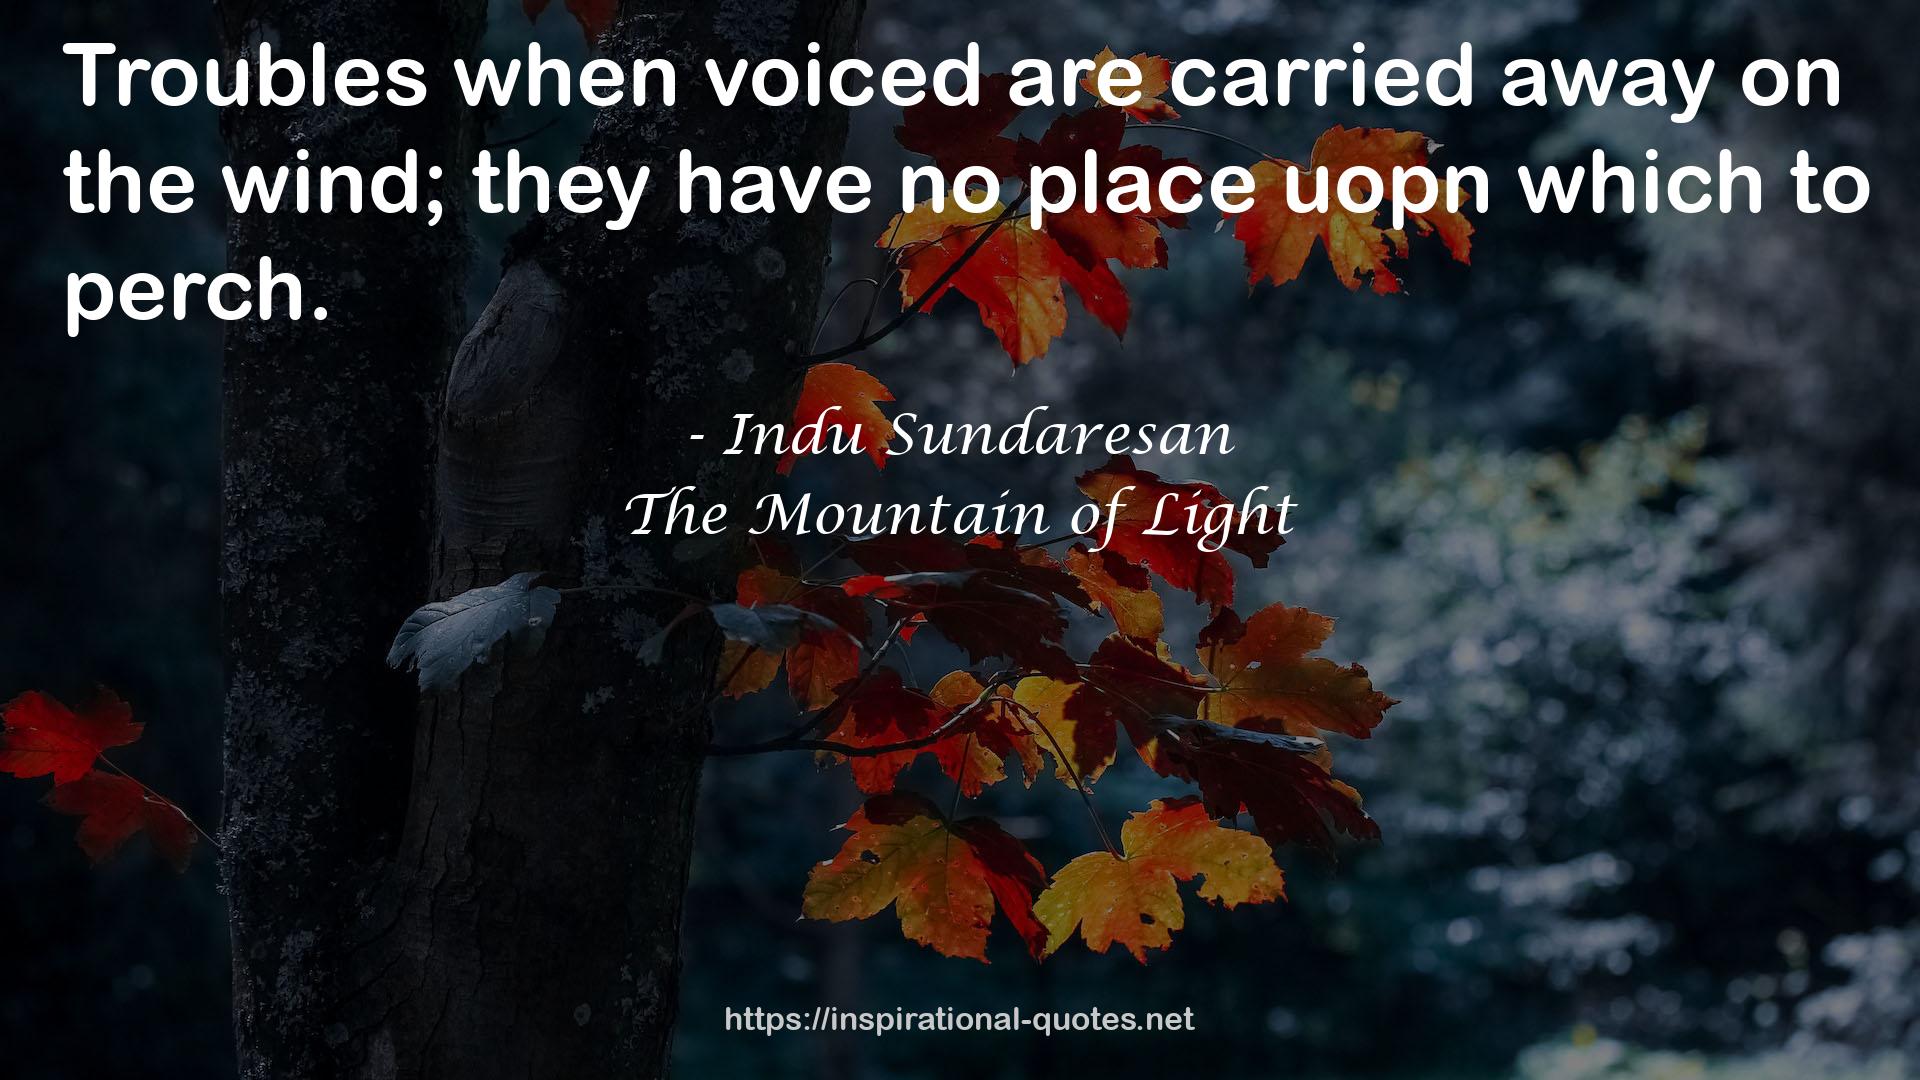 The Mountain of Light QUOTES